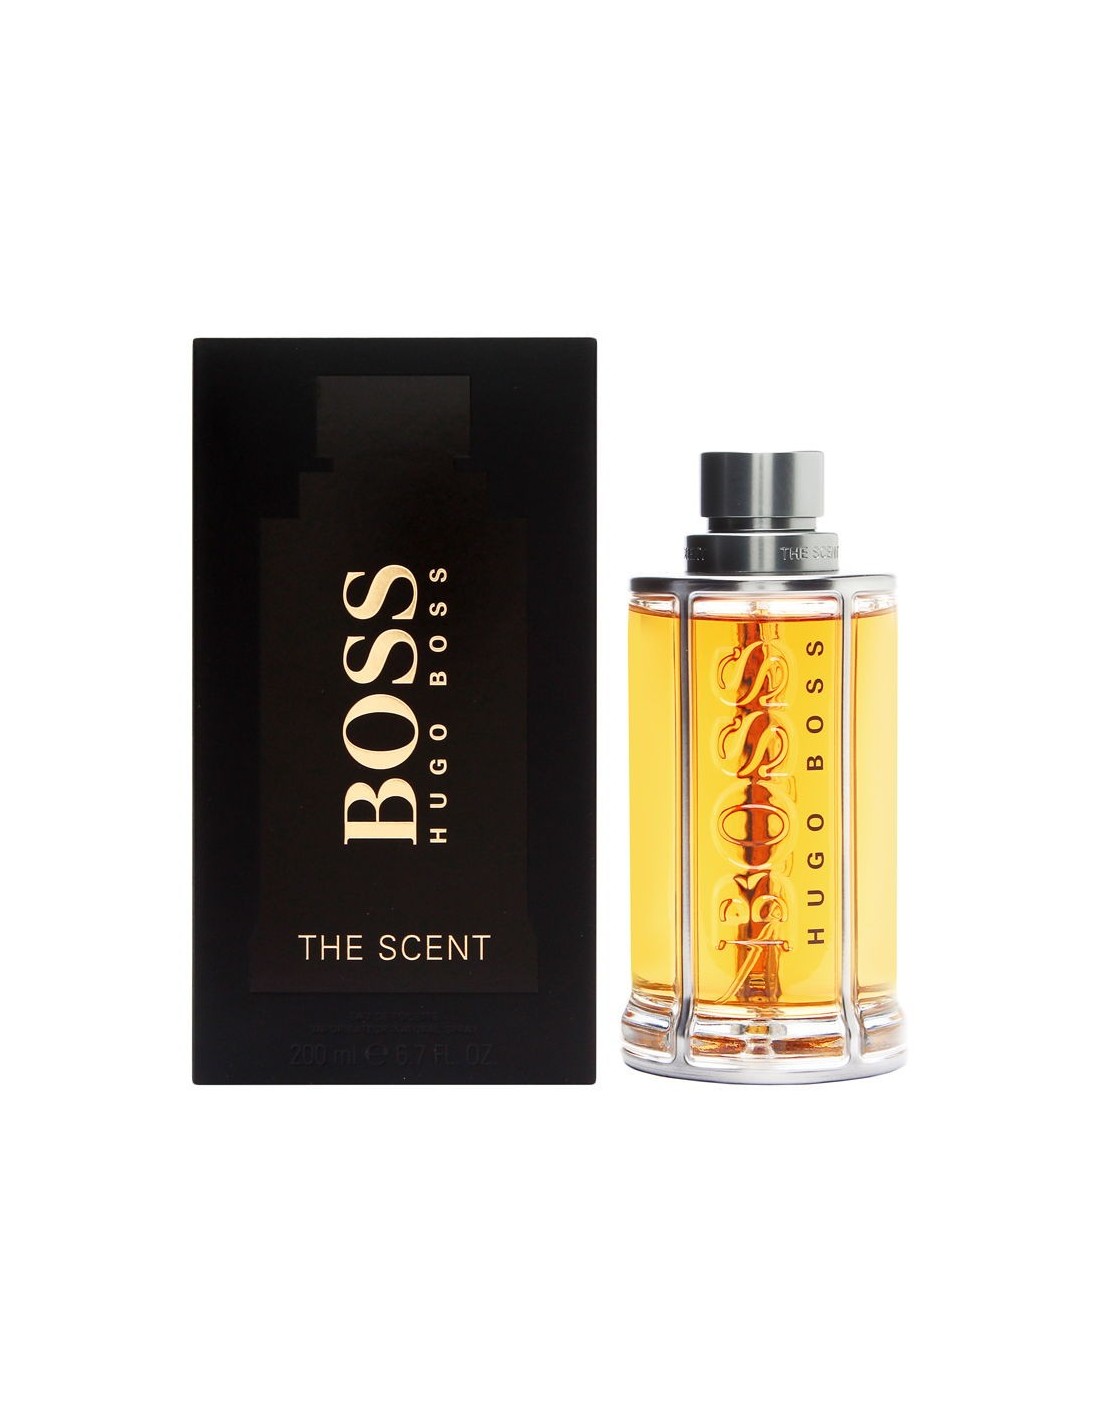 Le scent hugo boss. Hugo Boss the Scent 100 ml. Хьюго босс the Scent мужские. Hugo Boss Boss the Scent, 100 ml. Hugo Boss Boss the Scent EDT 100мл.